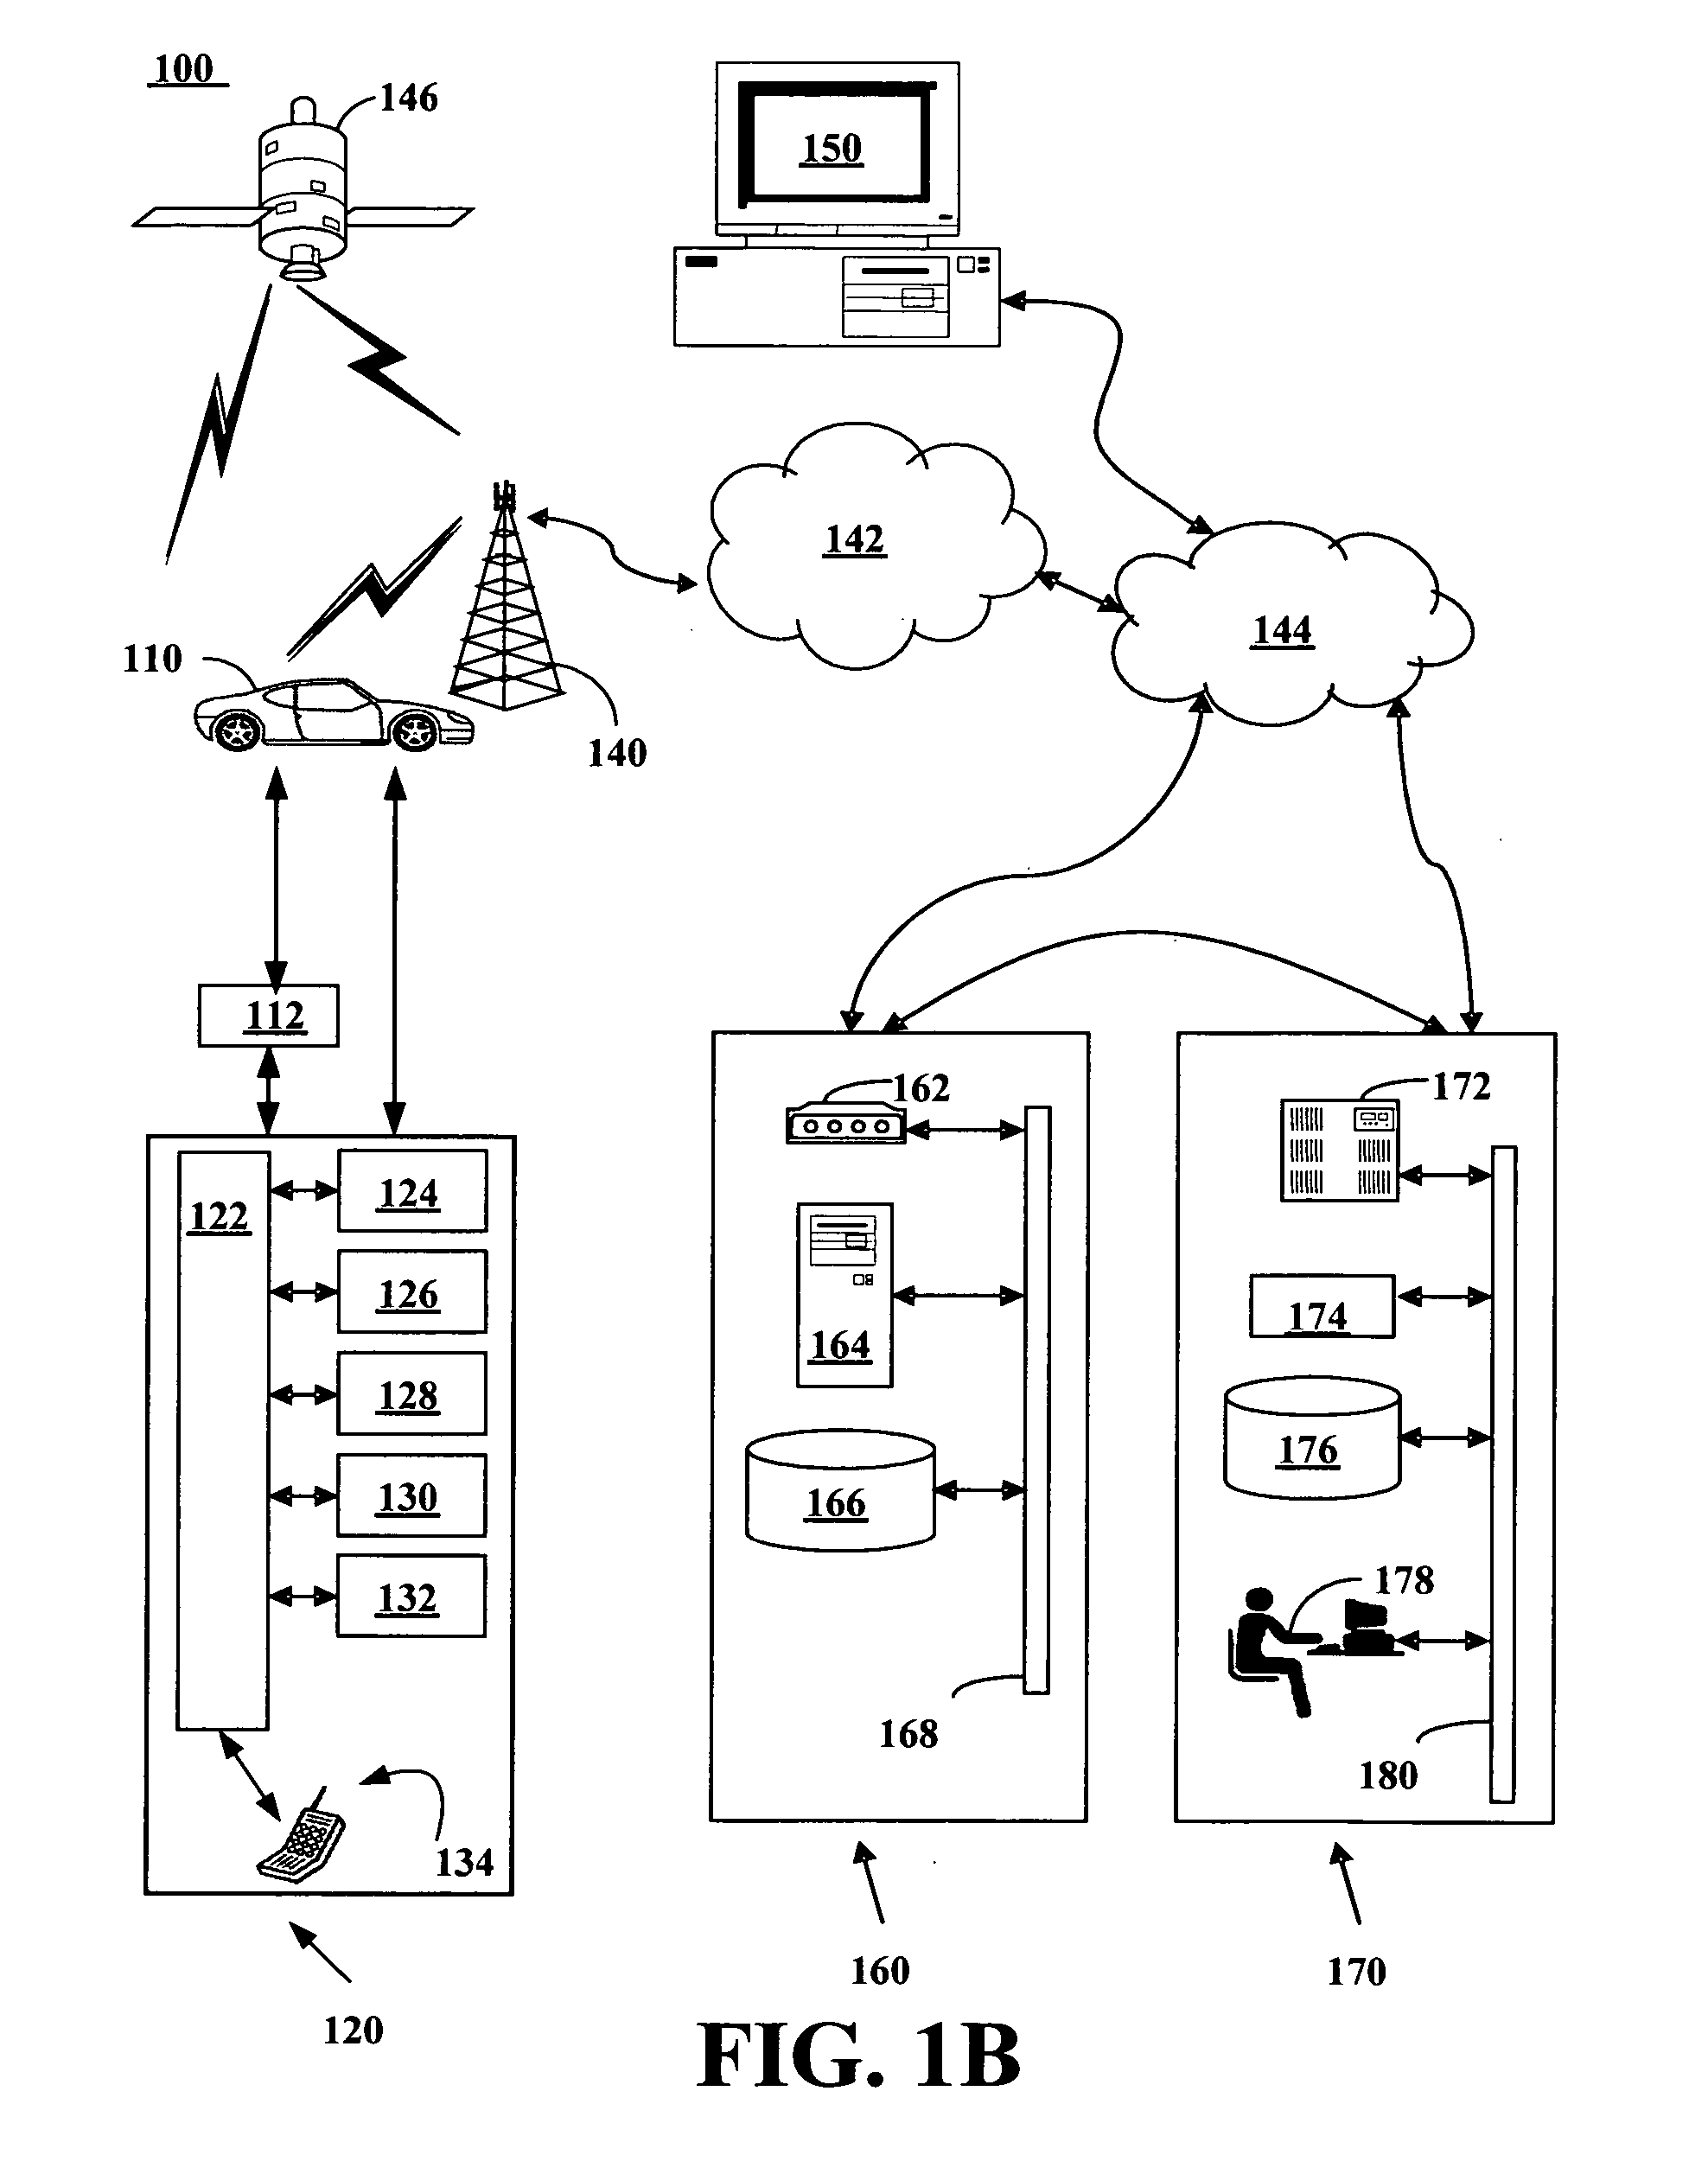 Method and system for routing toll-free calls to wireless devices